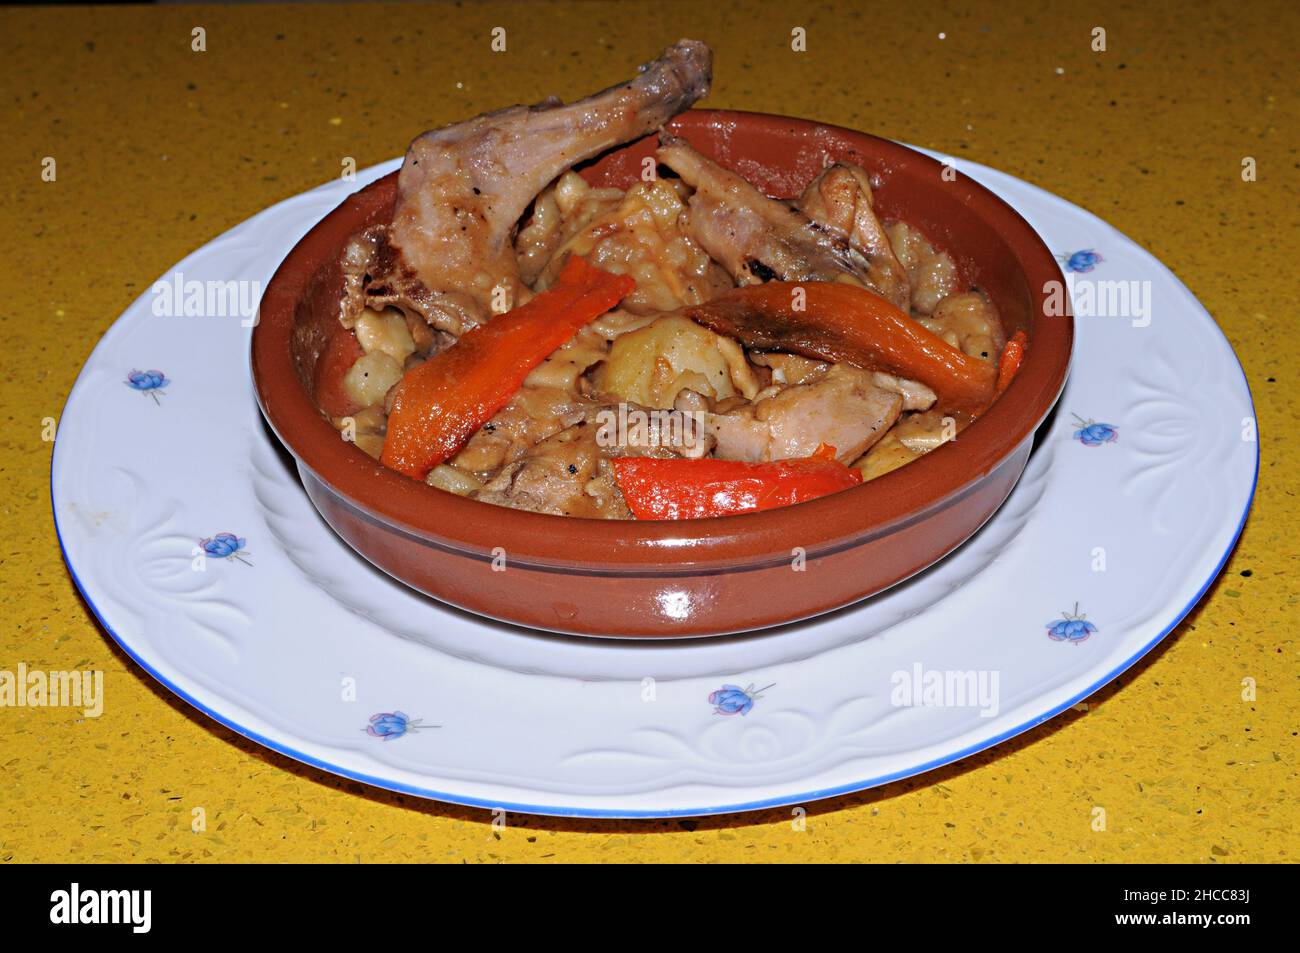 Baked rabbit in tomato sauce with rosemary and basil. Italian Cuisine. Stock Photo